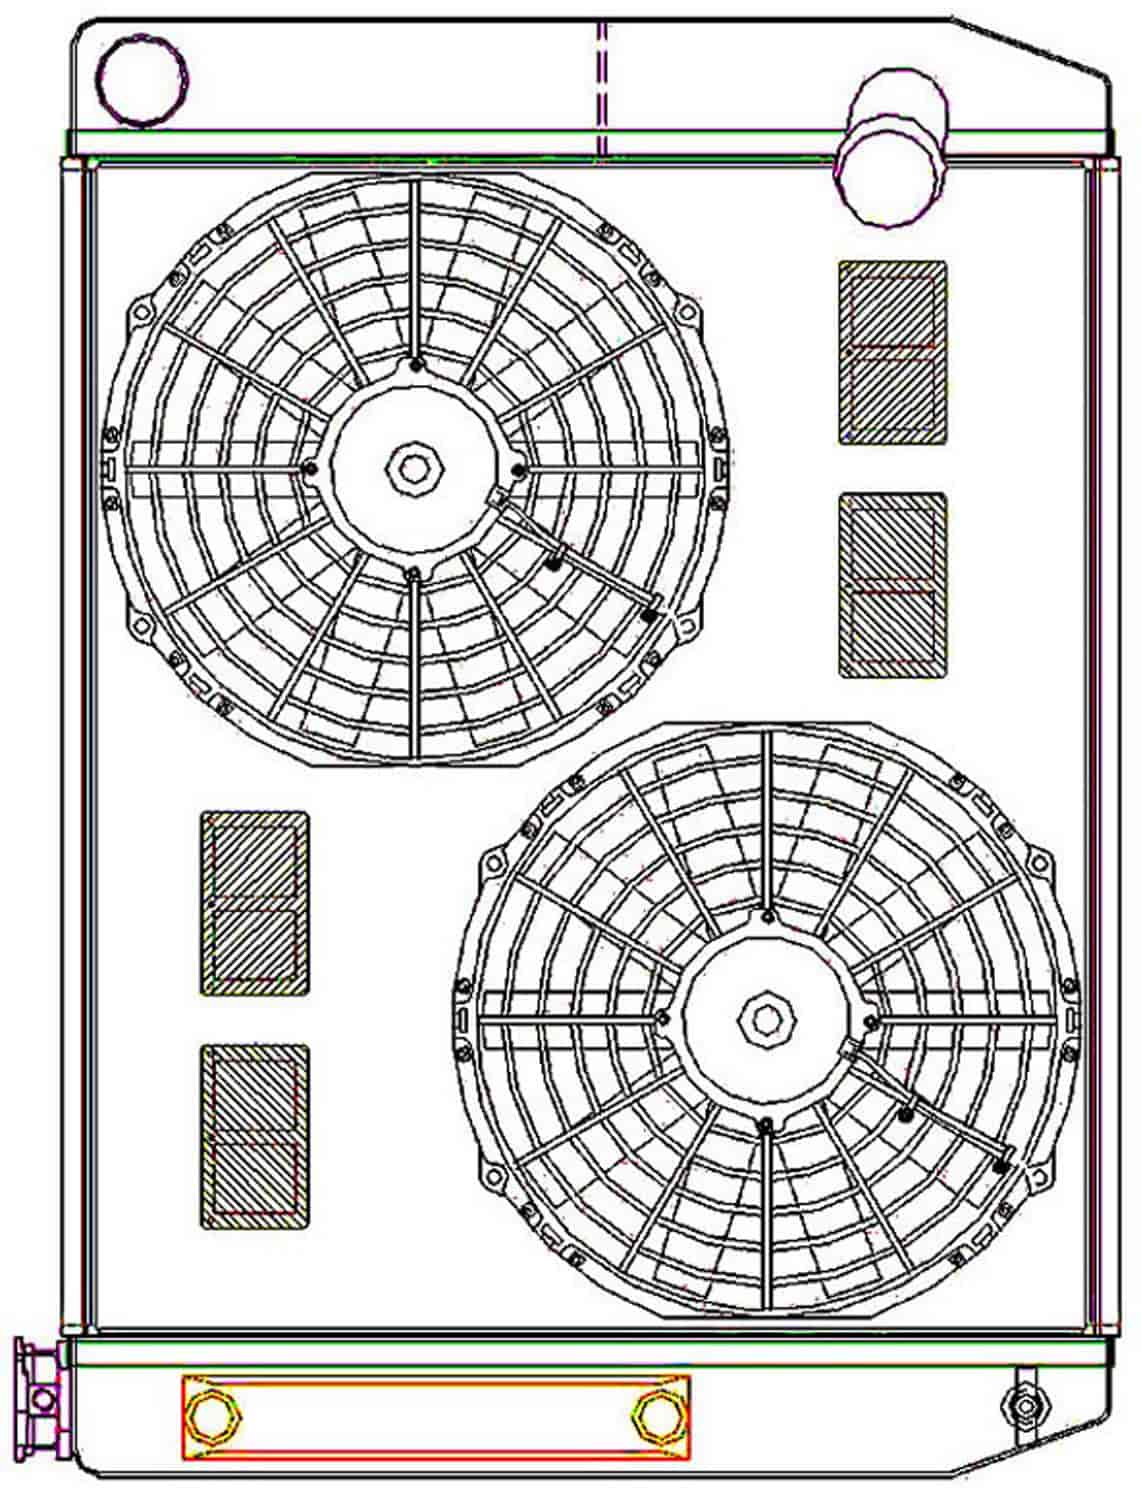 ClassicCool ComboUnit Universal Fit Radiator and Fan Dual Pass Crossflow Design 26" x 19" with Transmission Cooler